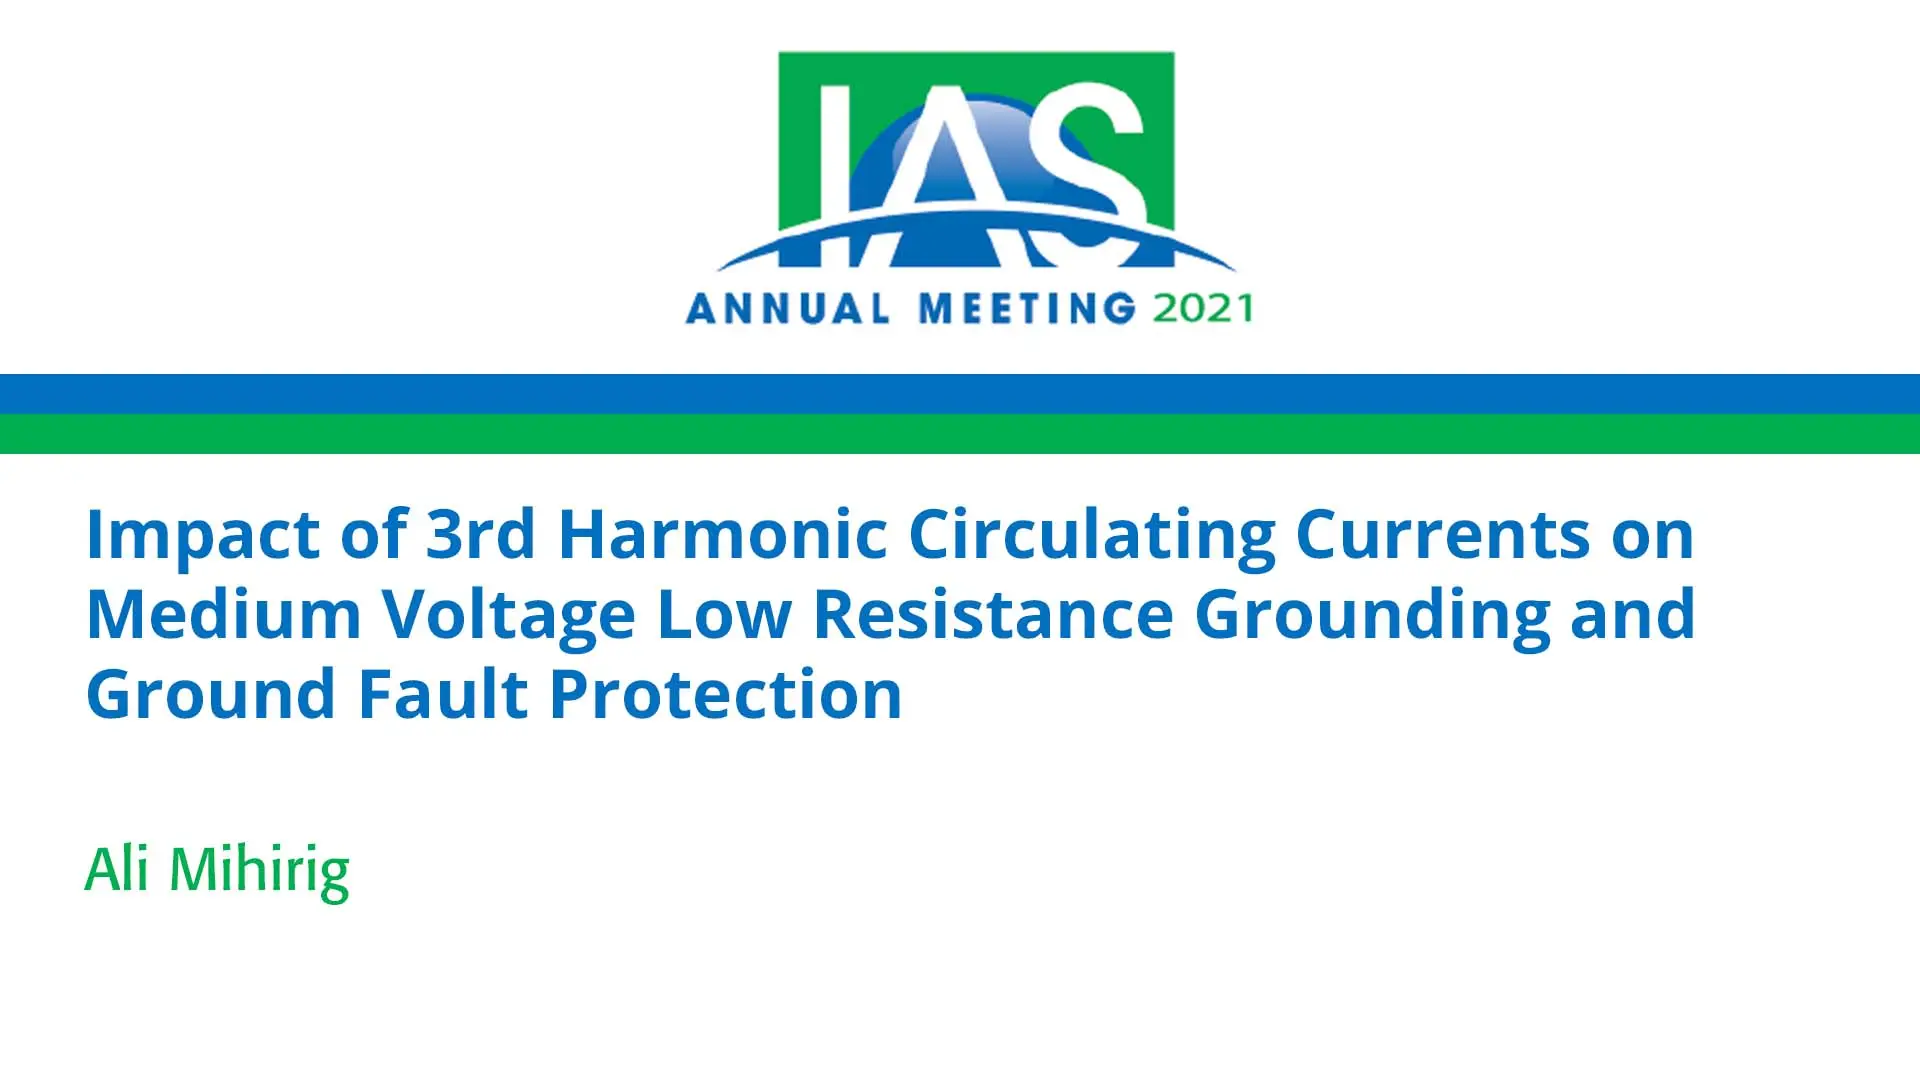 Impact of 3rd Harmonic Circulating Currents on Medium Voltage Low Resistance Grounding and Ground Fault Protection